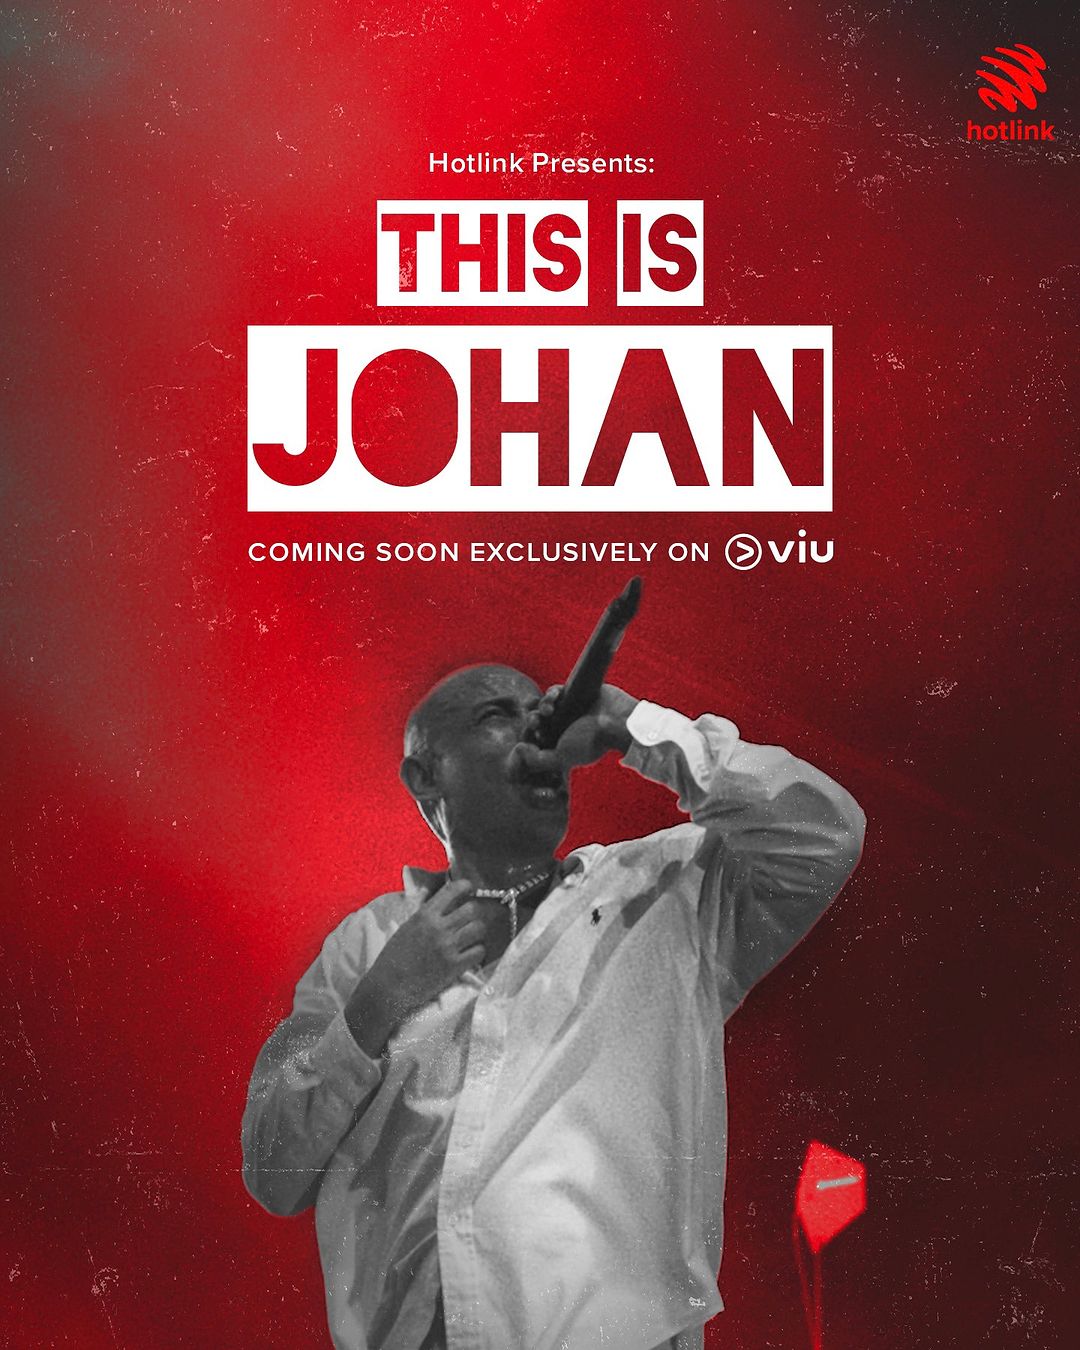 This Is Johan